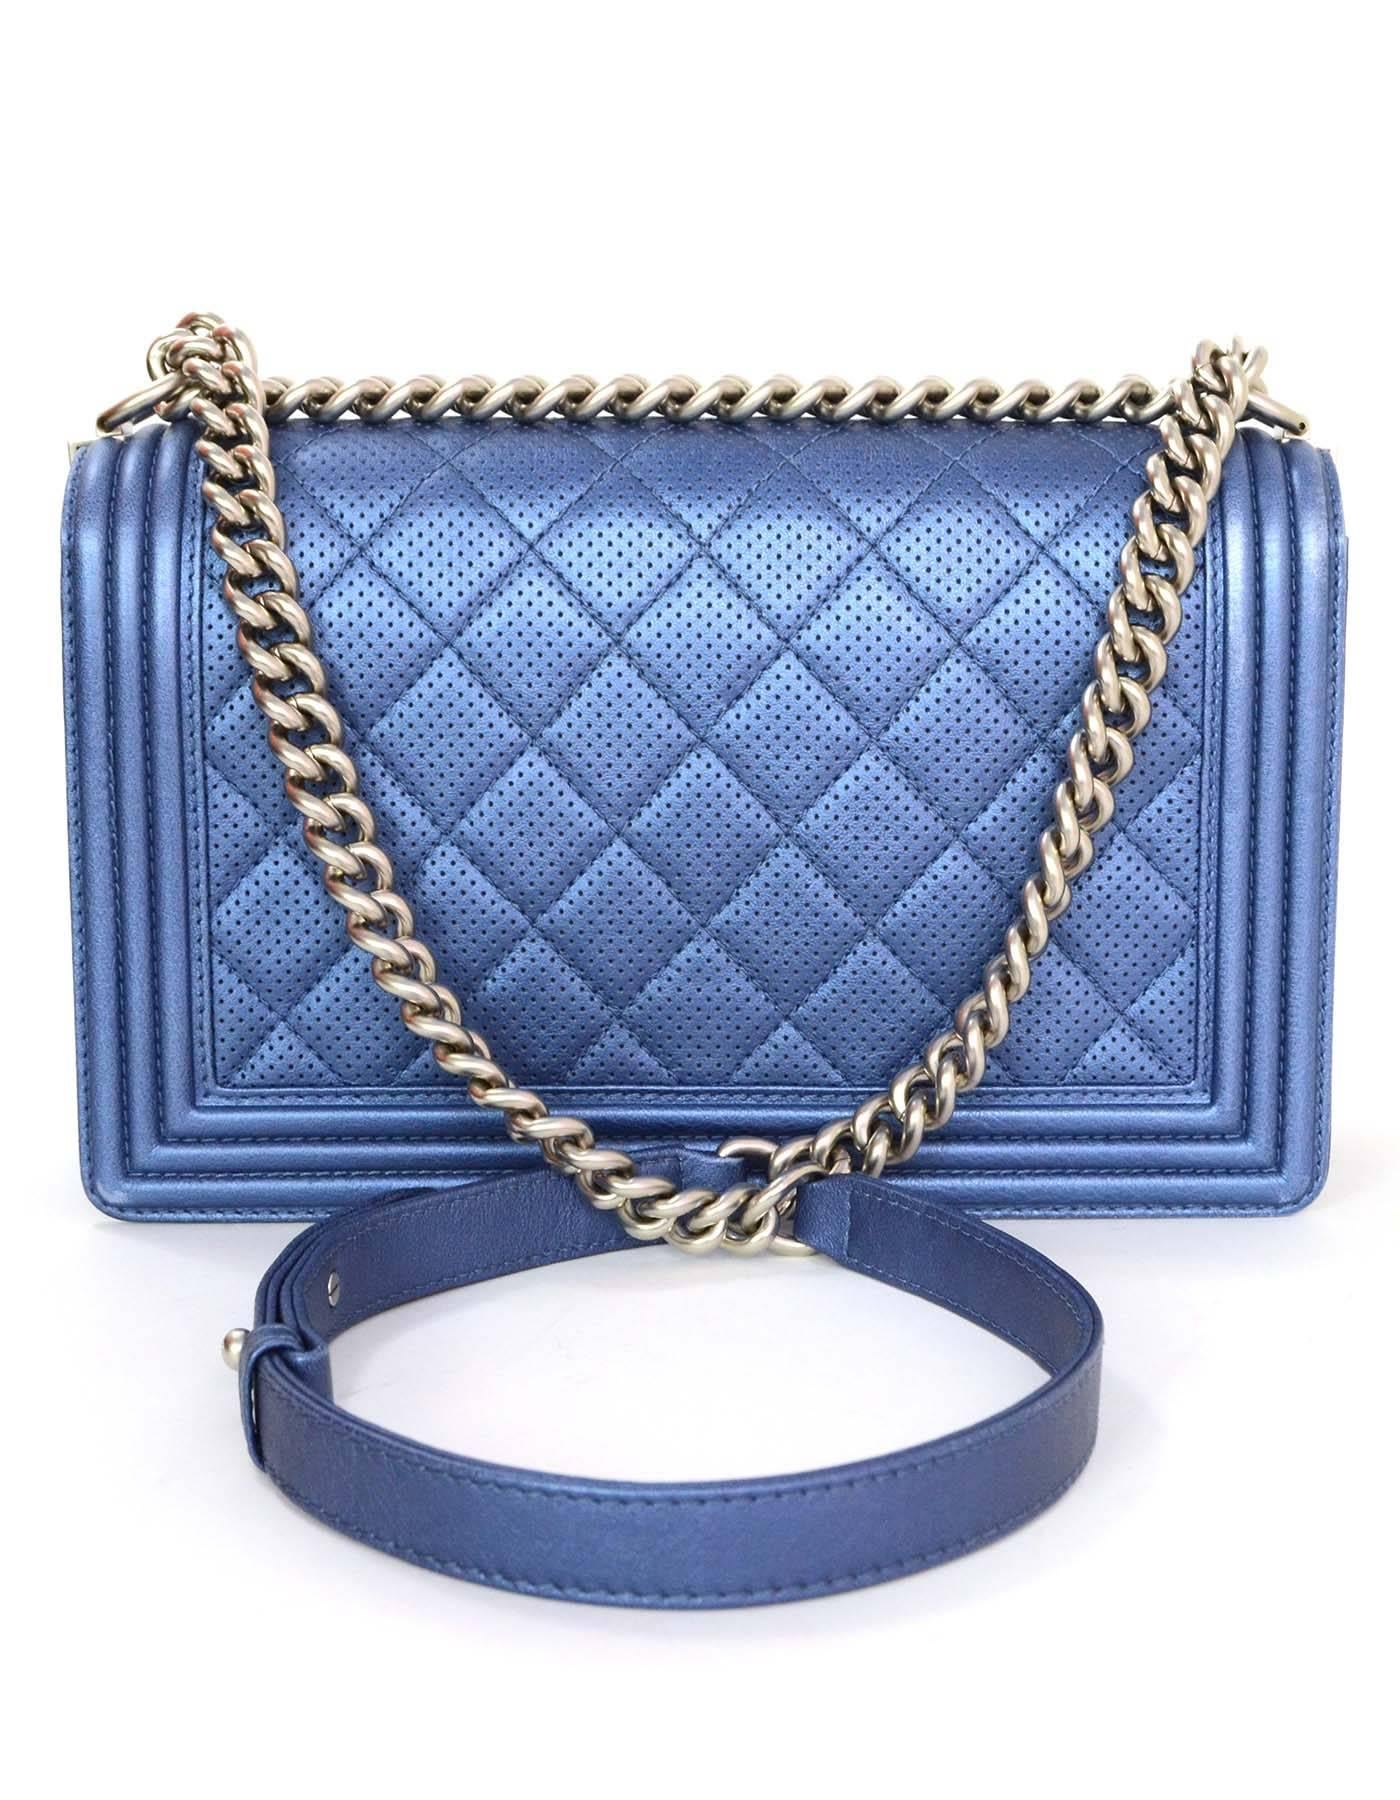 Chanel Metallic Blue Perforated New Medium Boy Bag 
Features adjustable shoulder strap and quilting throughout
Made In: Italy
Year of Production: 2015
Color: Iridescent blue
Hardware: Matte silvertone
Materials: Perforated leather
Lining: